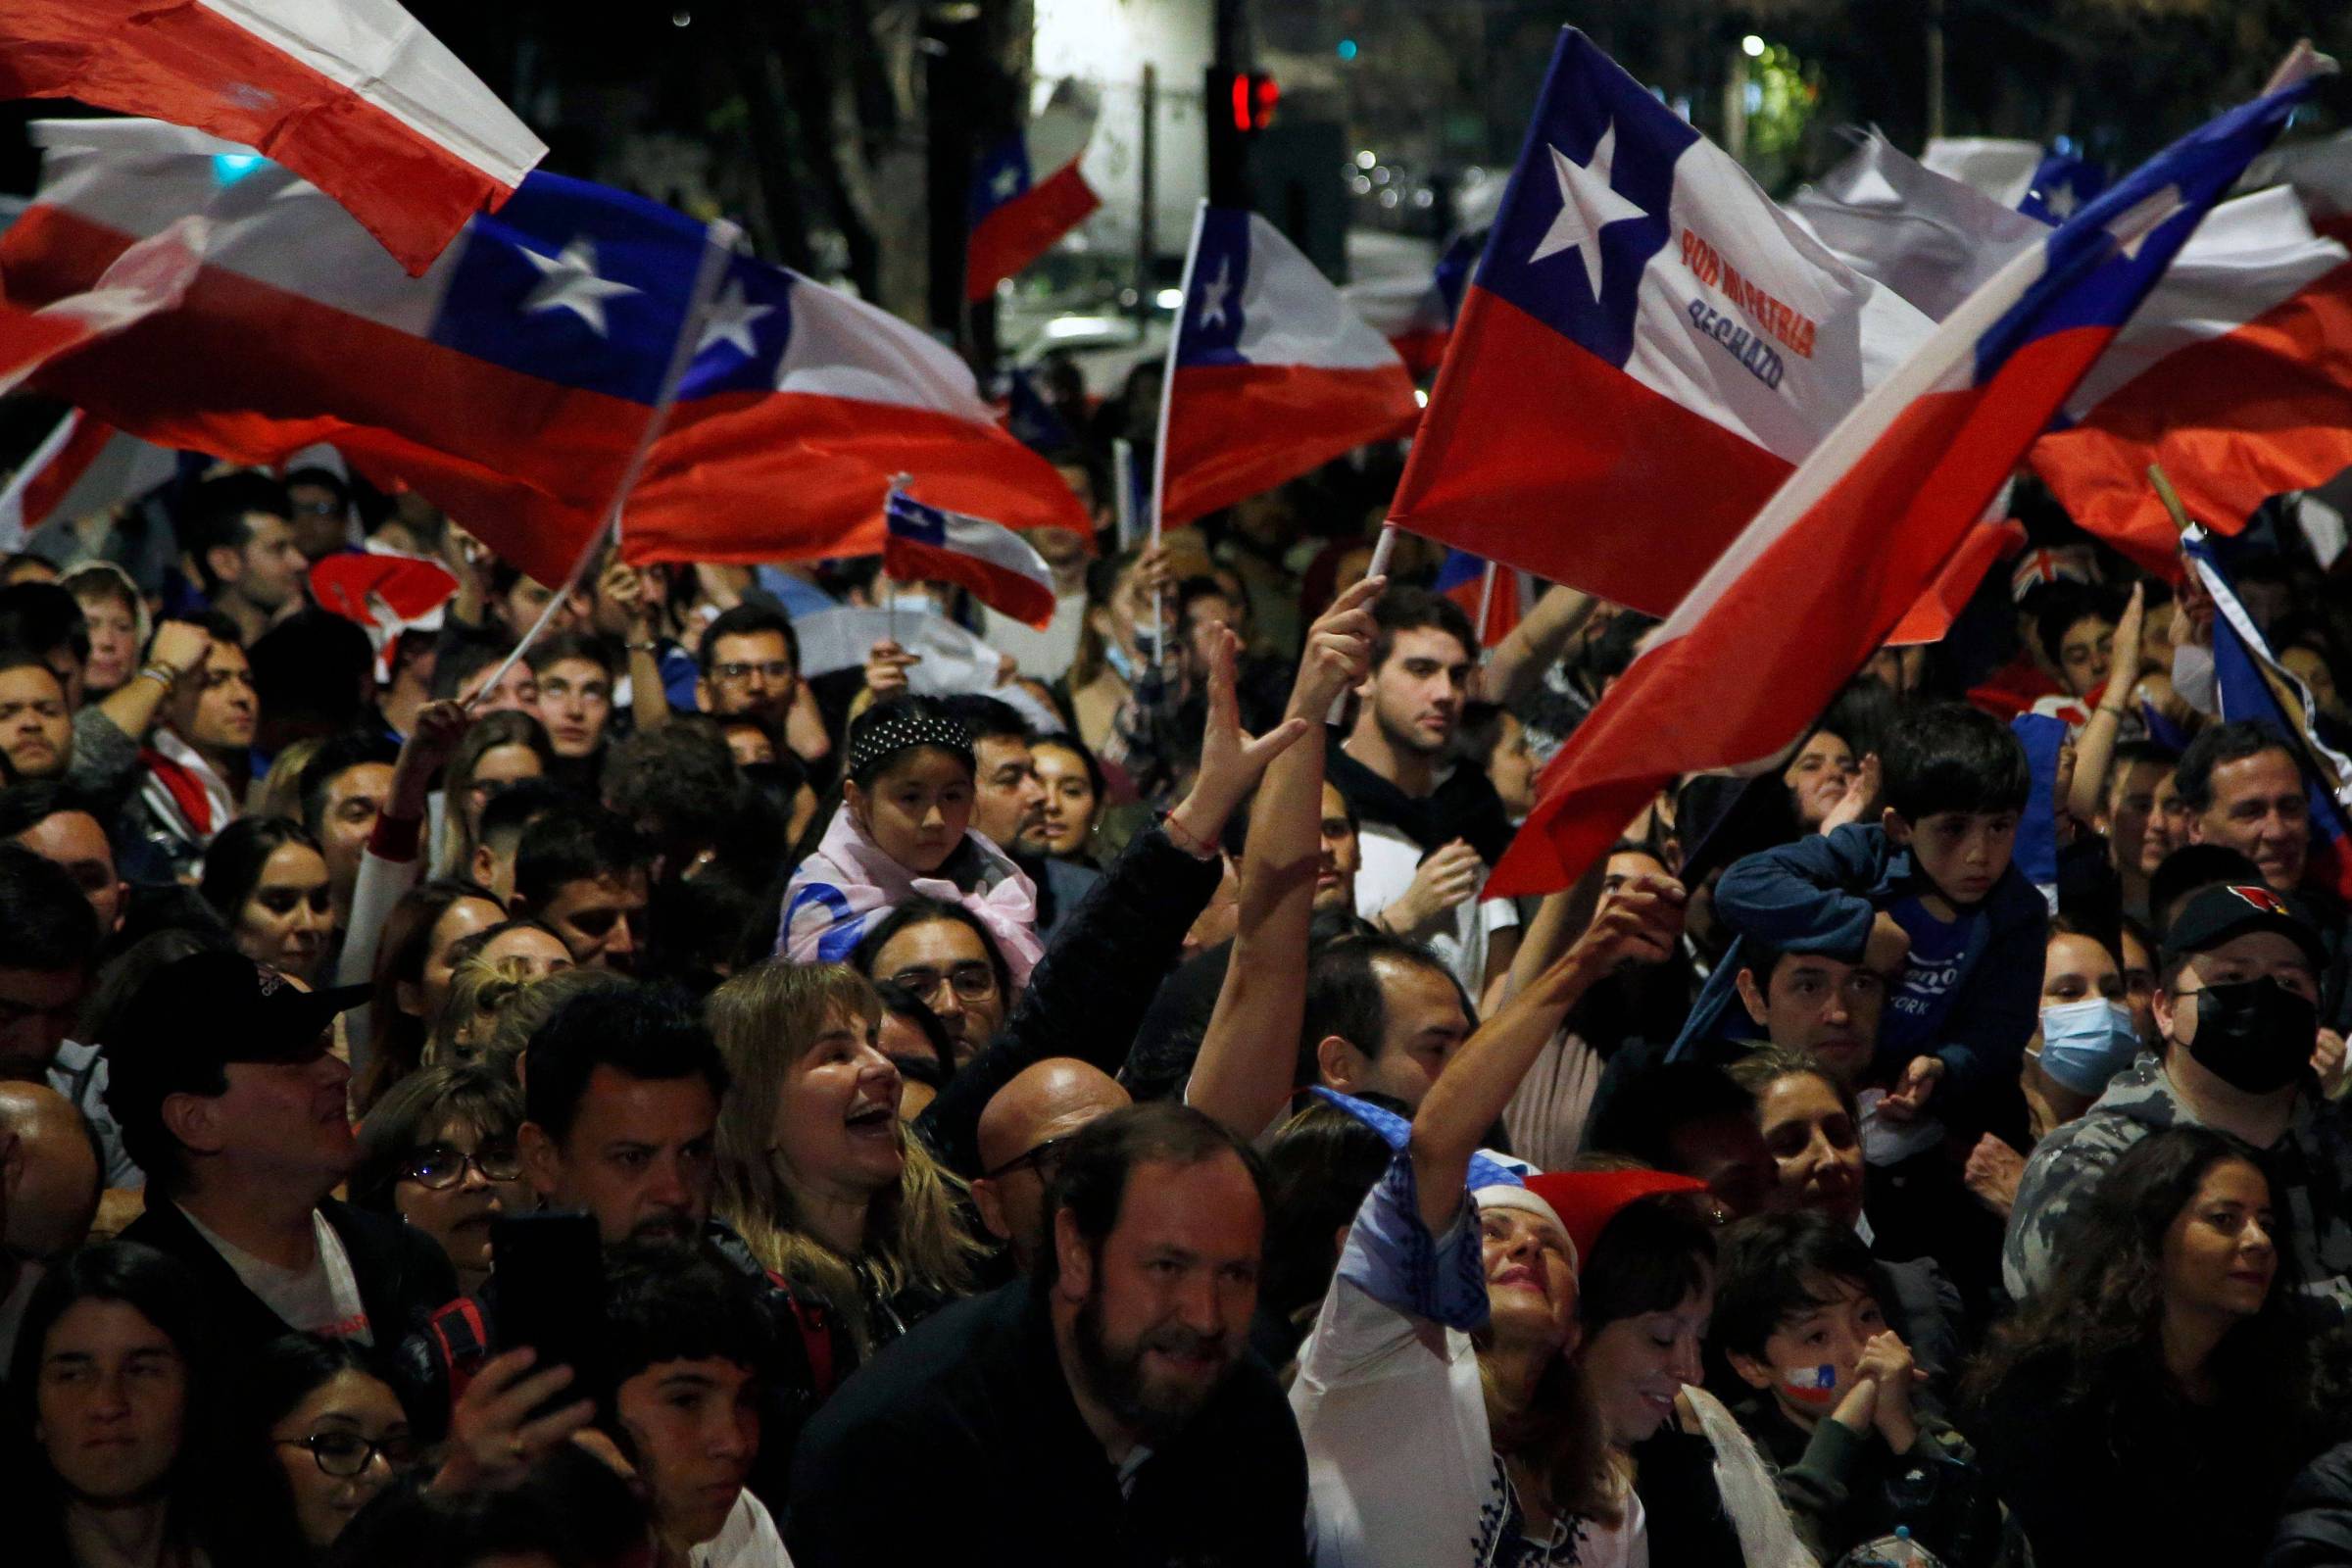 Chile submits new Constitution proposal for popular vote